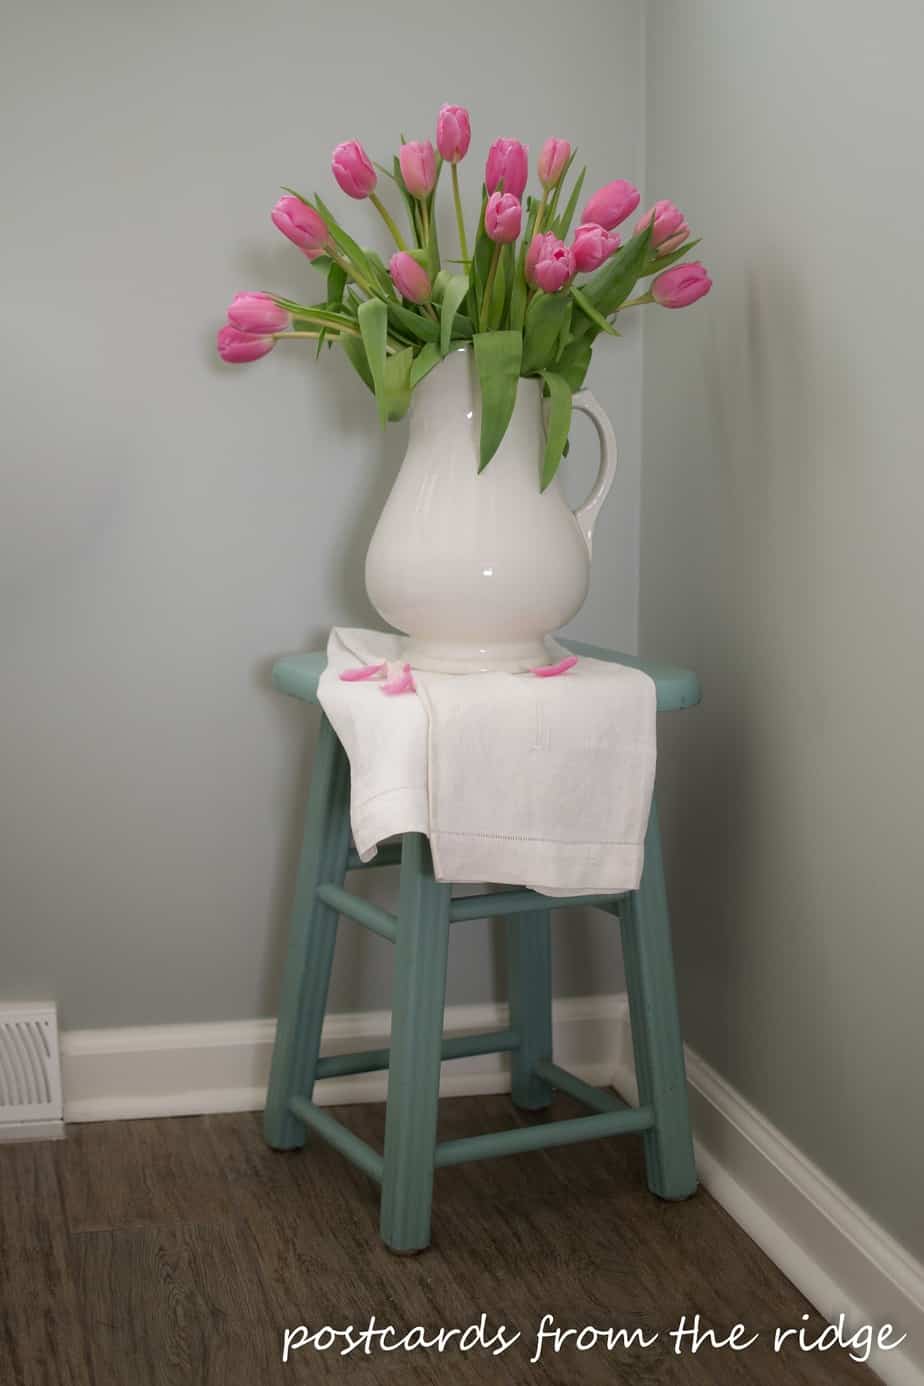 Pretty Pink Tulips in a vintage white pitcher. Postcards from the Ridge